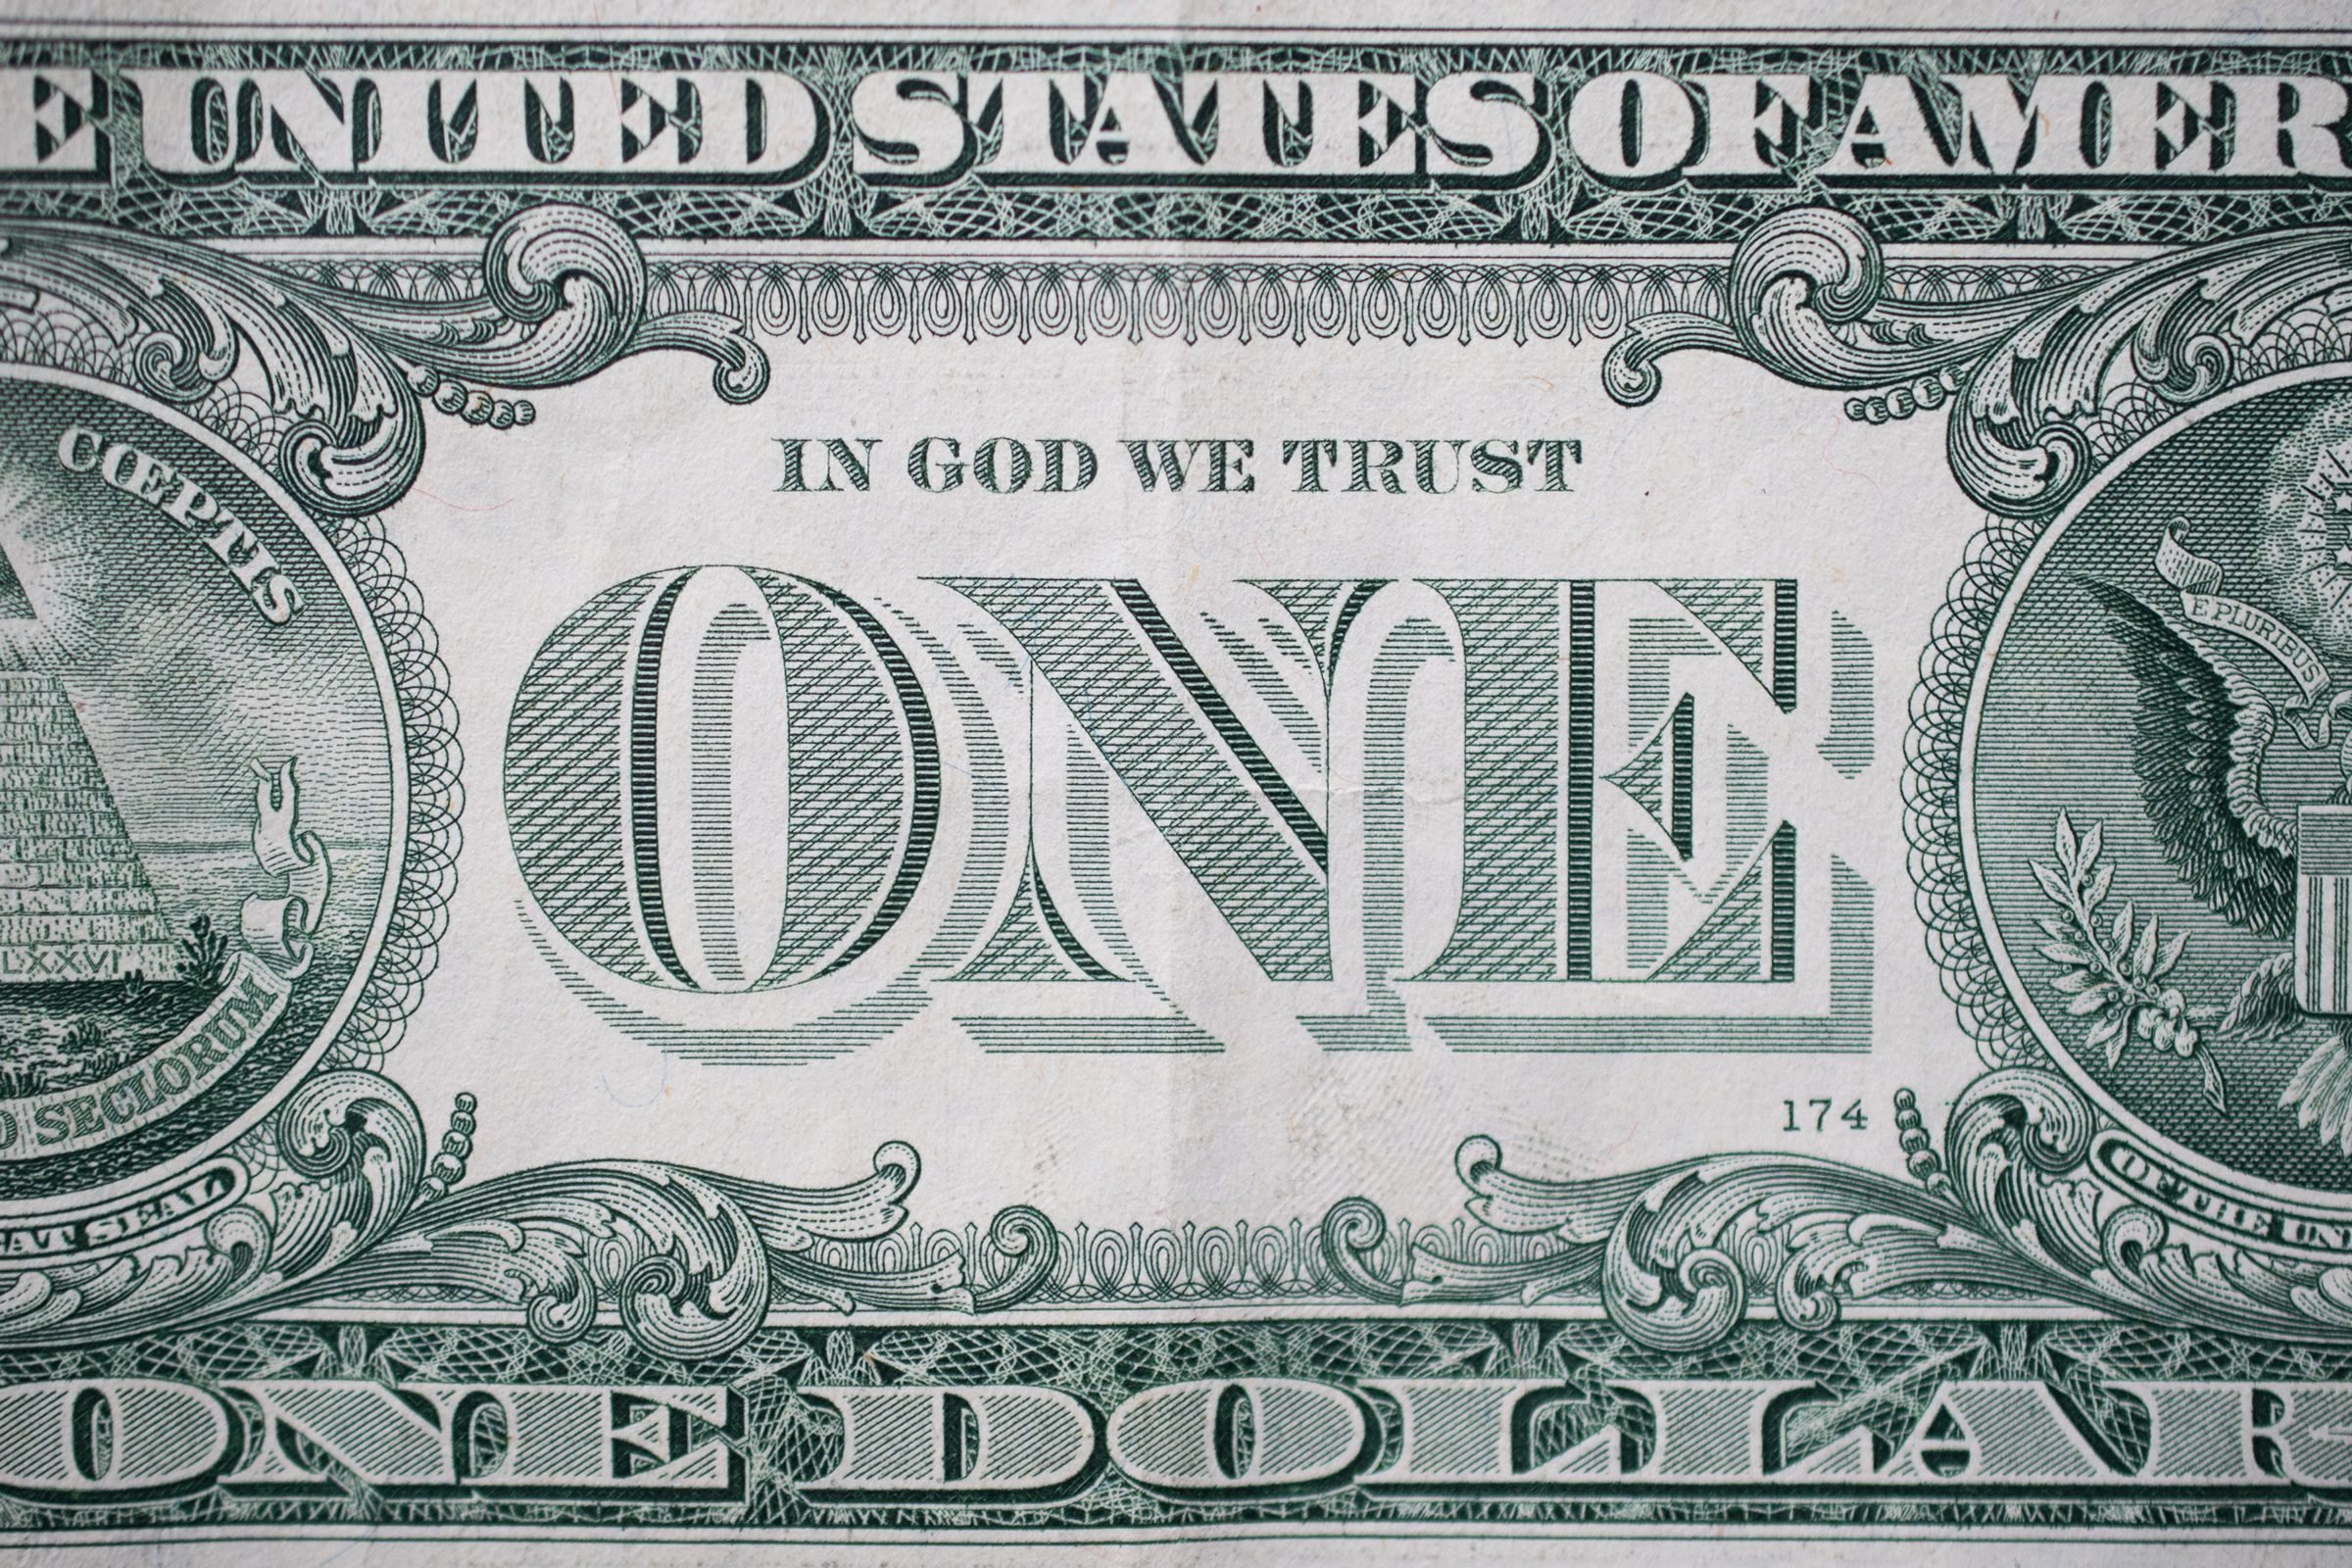 10 Fun Facts About the $1 Bill